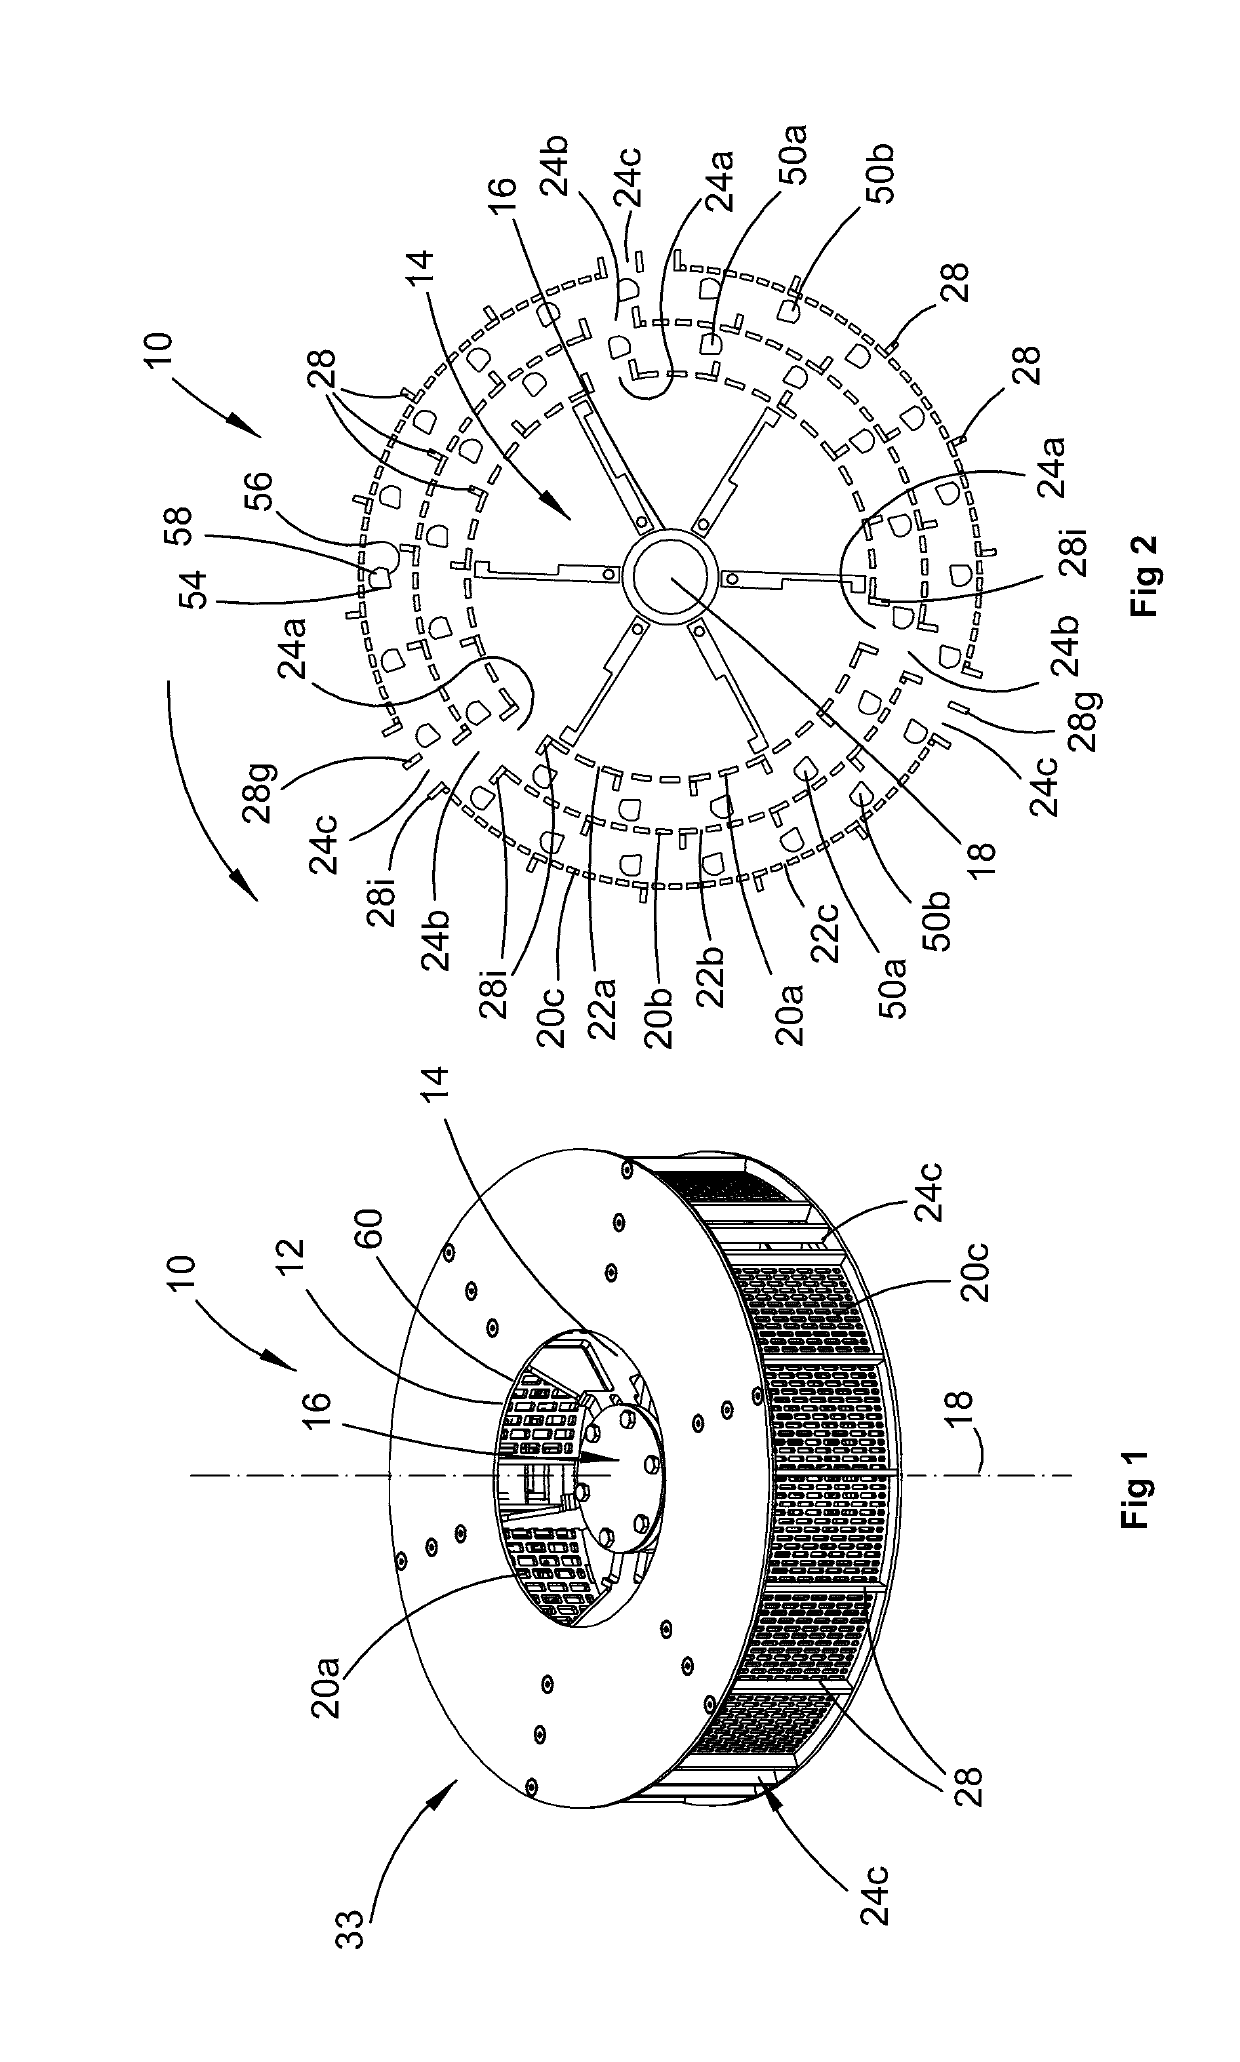 A multistage hammer mill and a residue processing system incorporating same